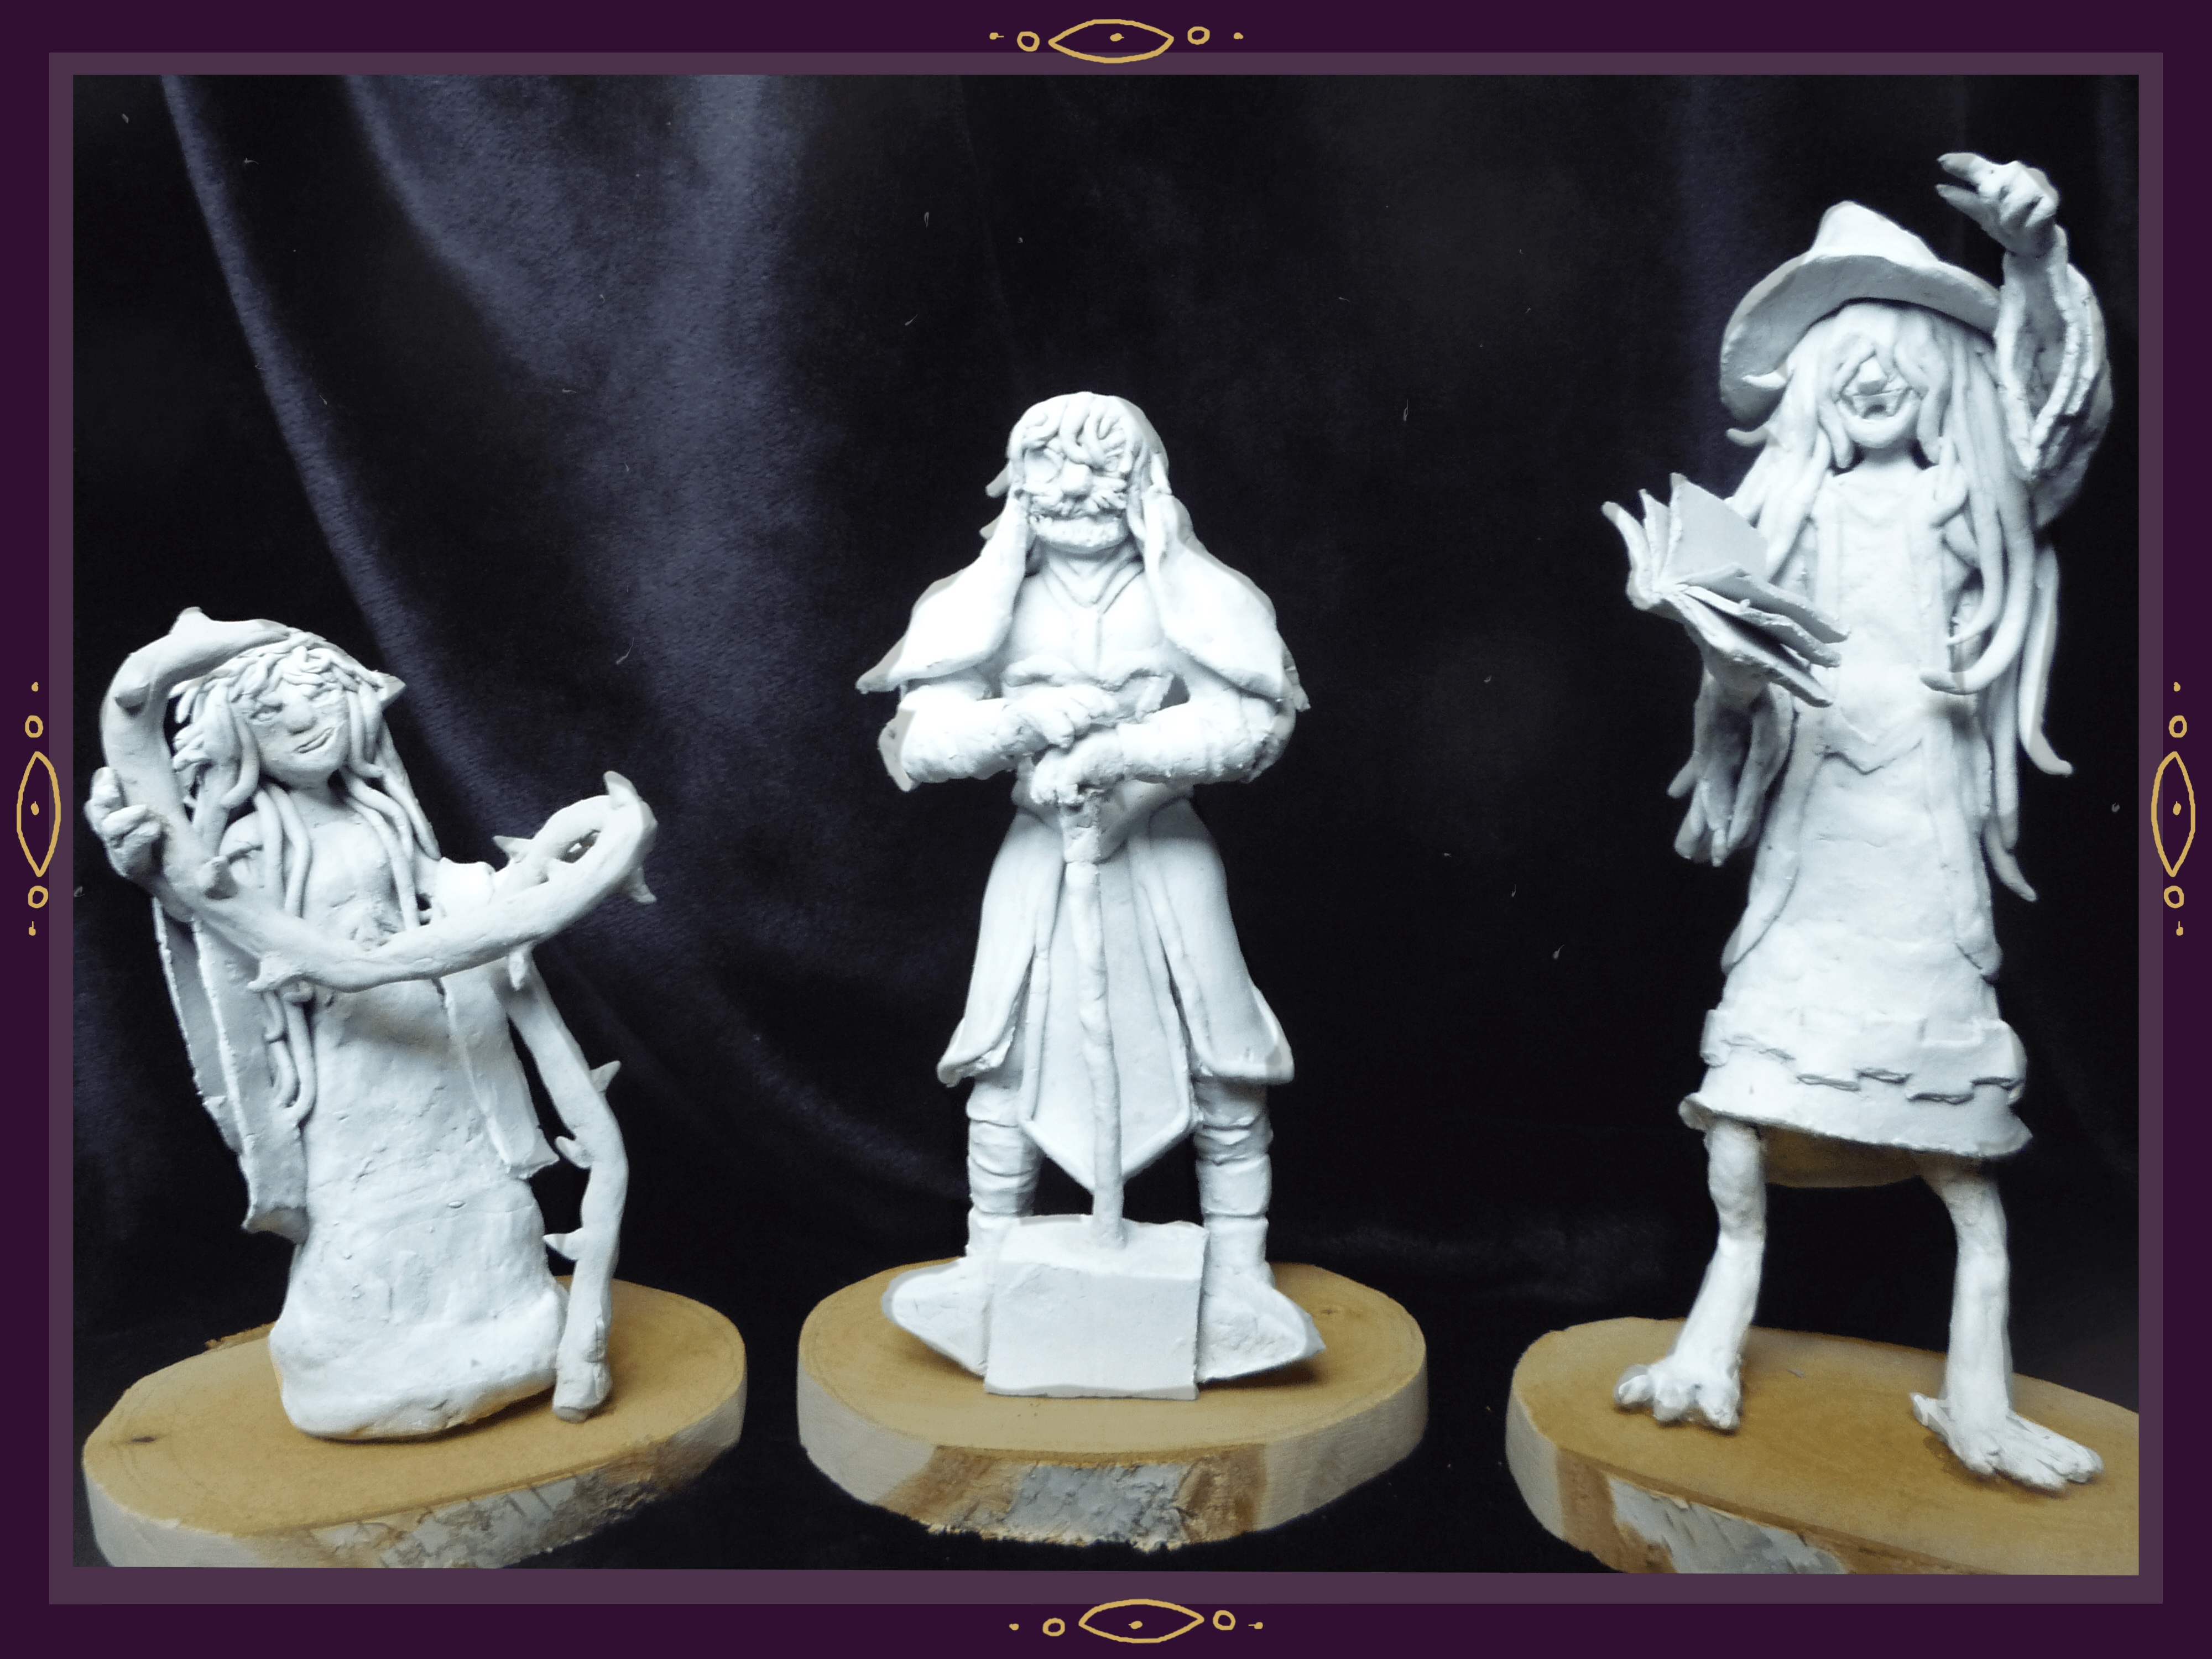 King Edgar, Queen Pixie, and Lord Smarf as clay statues